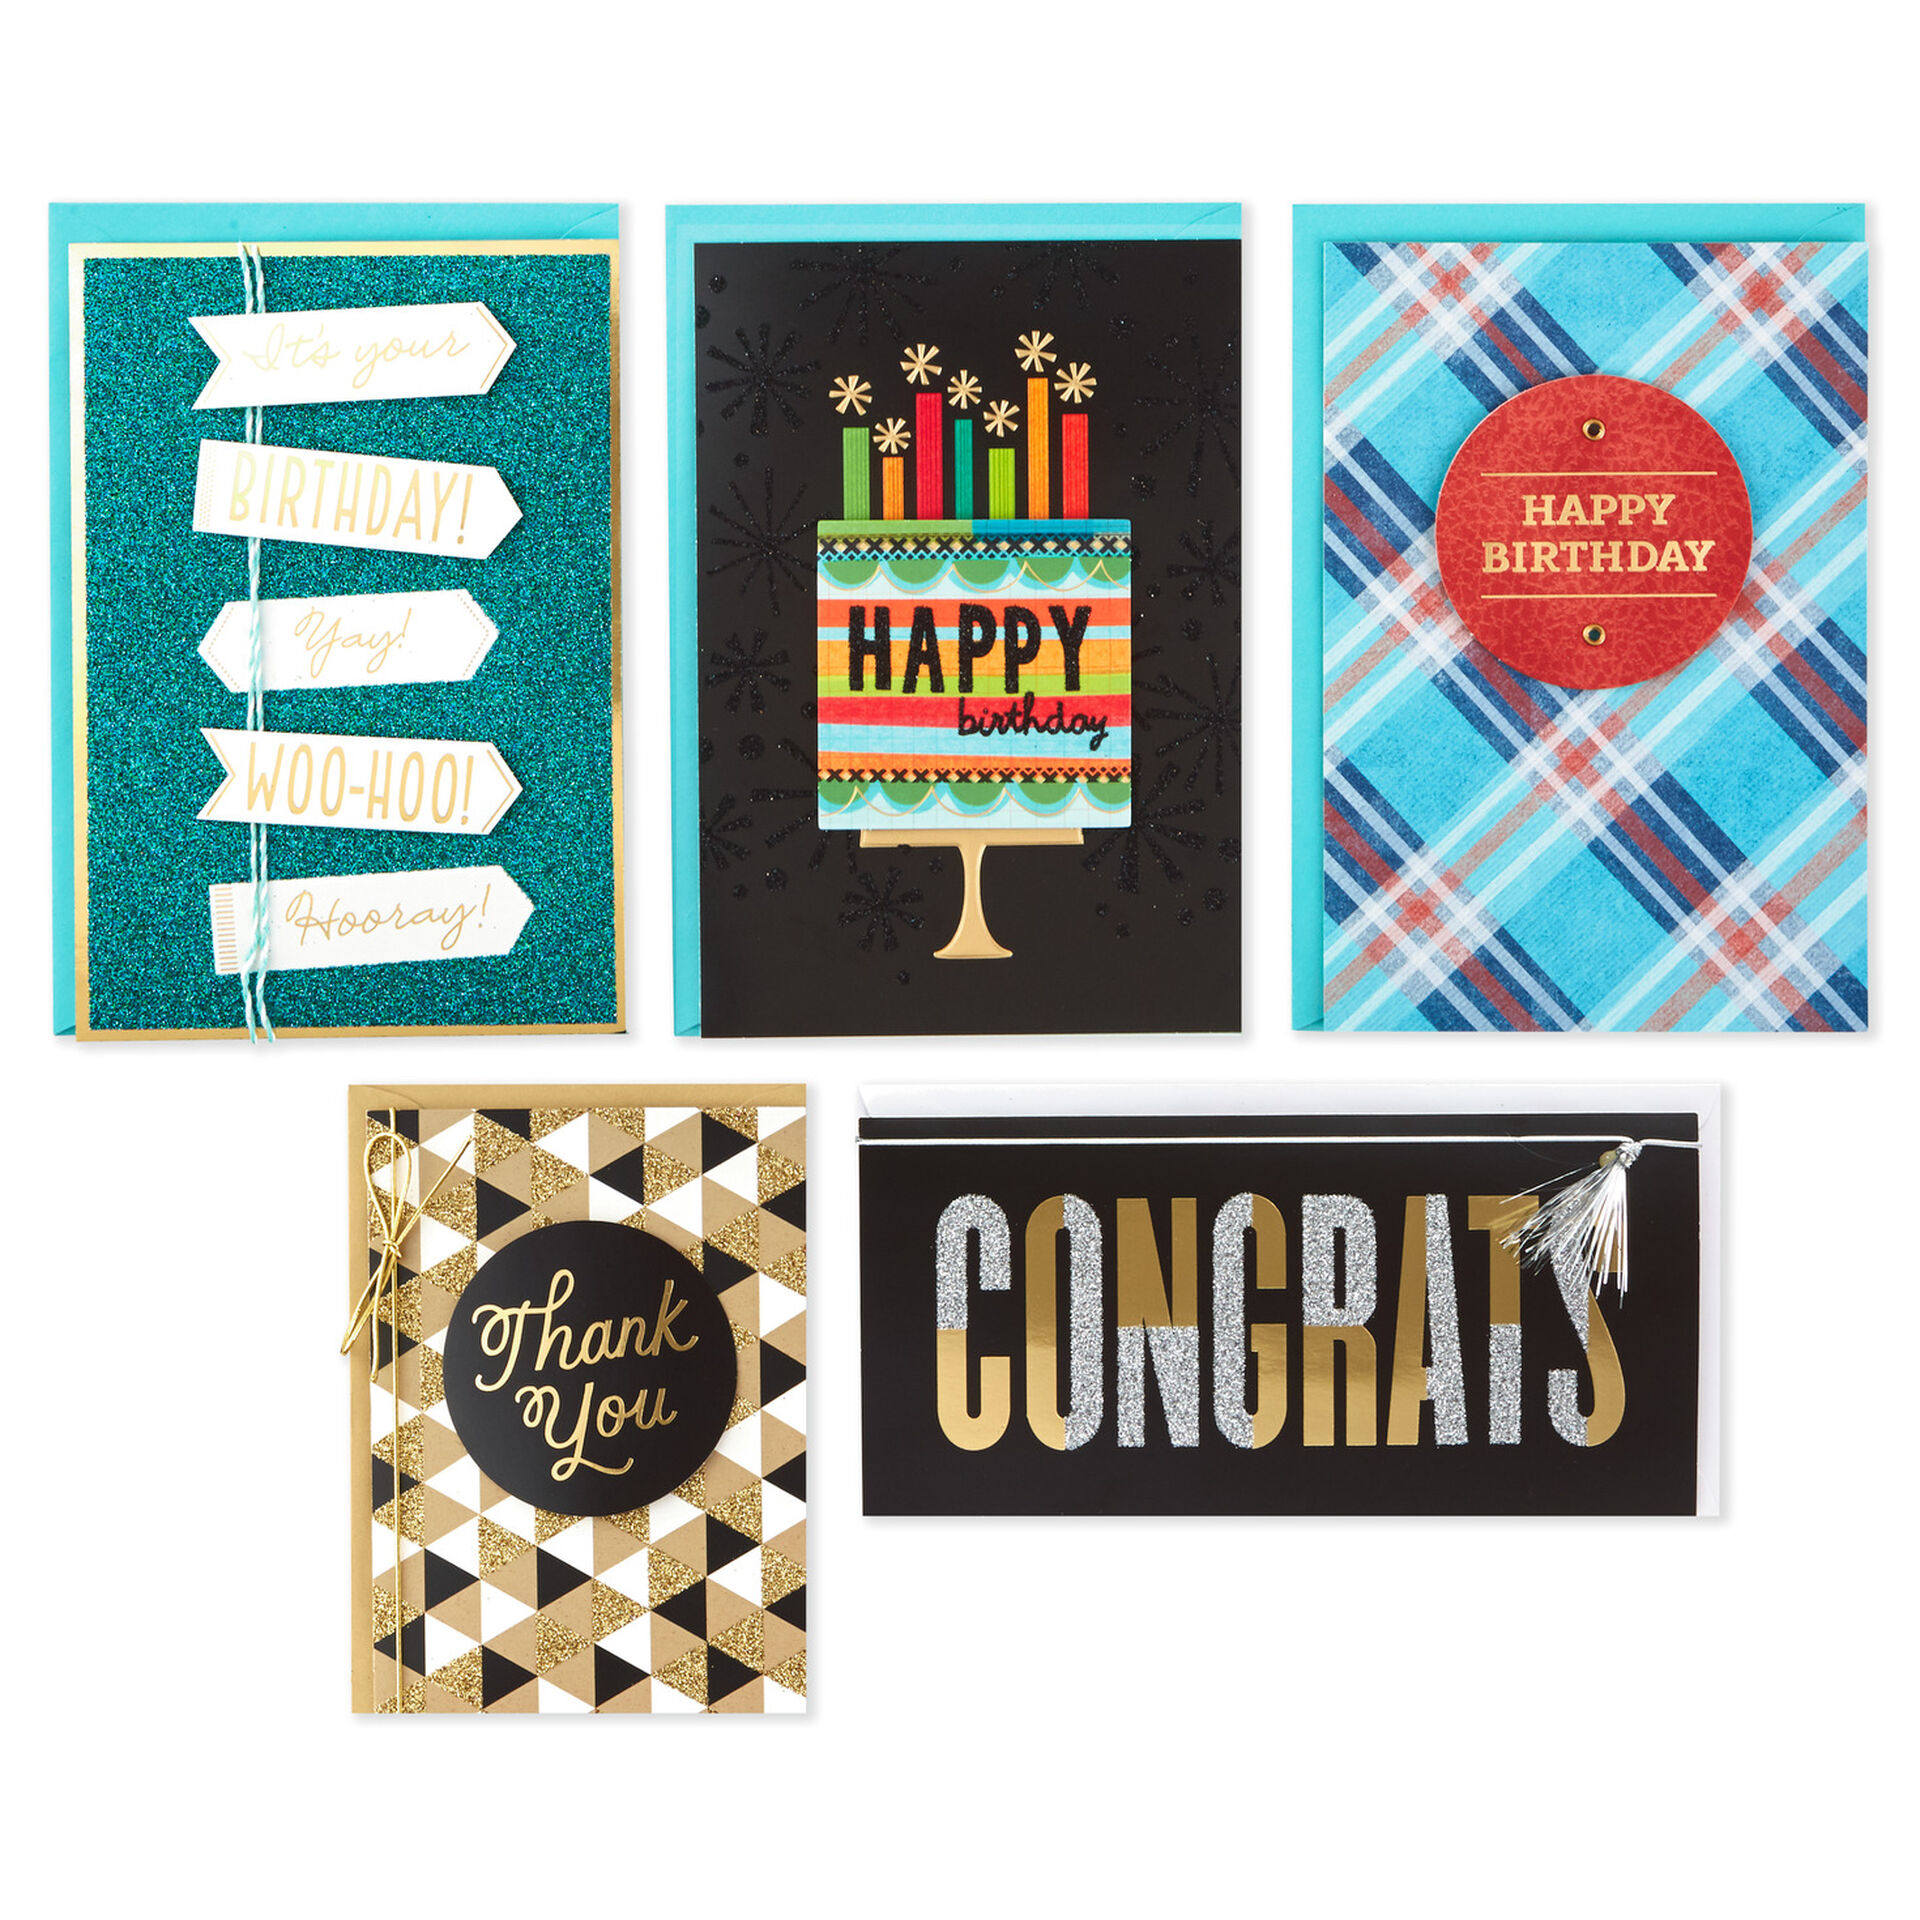 All-Occasion-Card-Assortment-in-Decorative-Box_5EDX3458_03